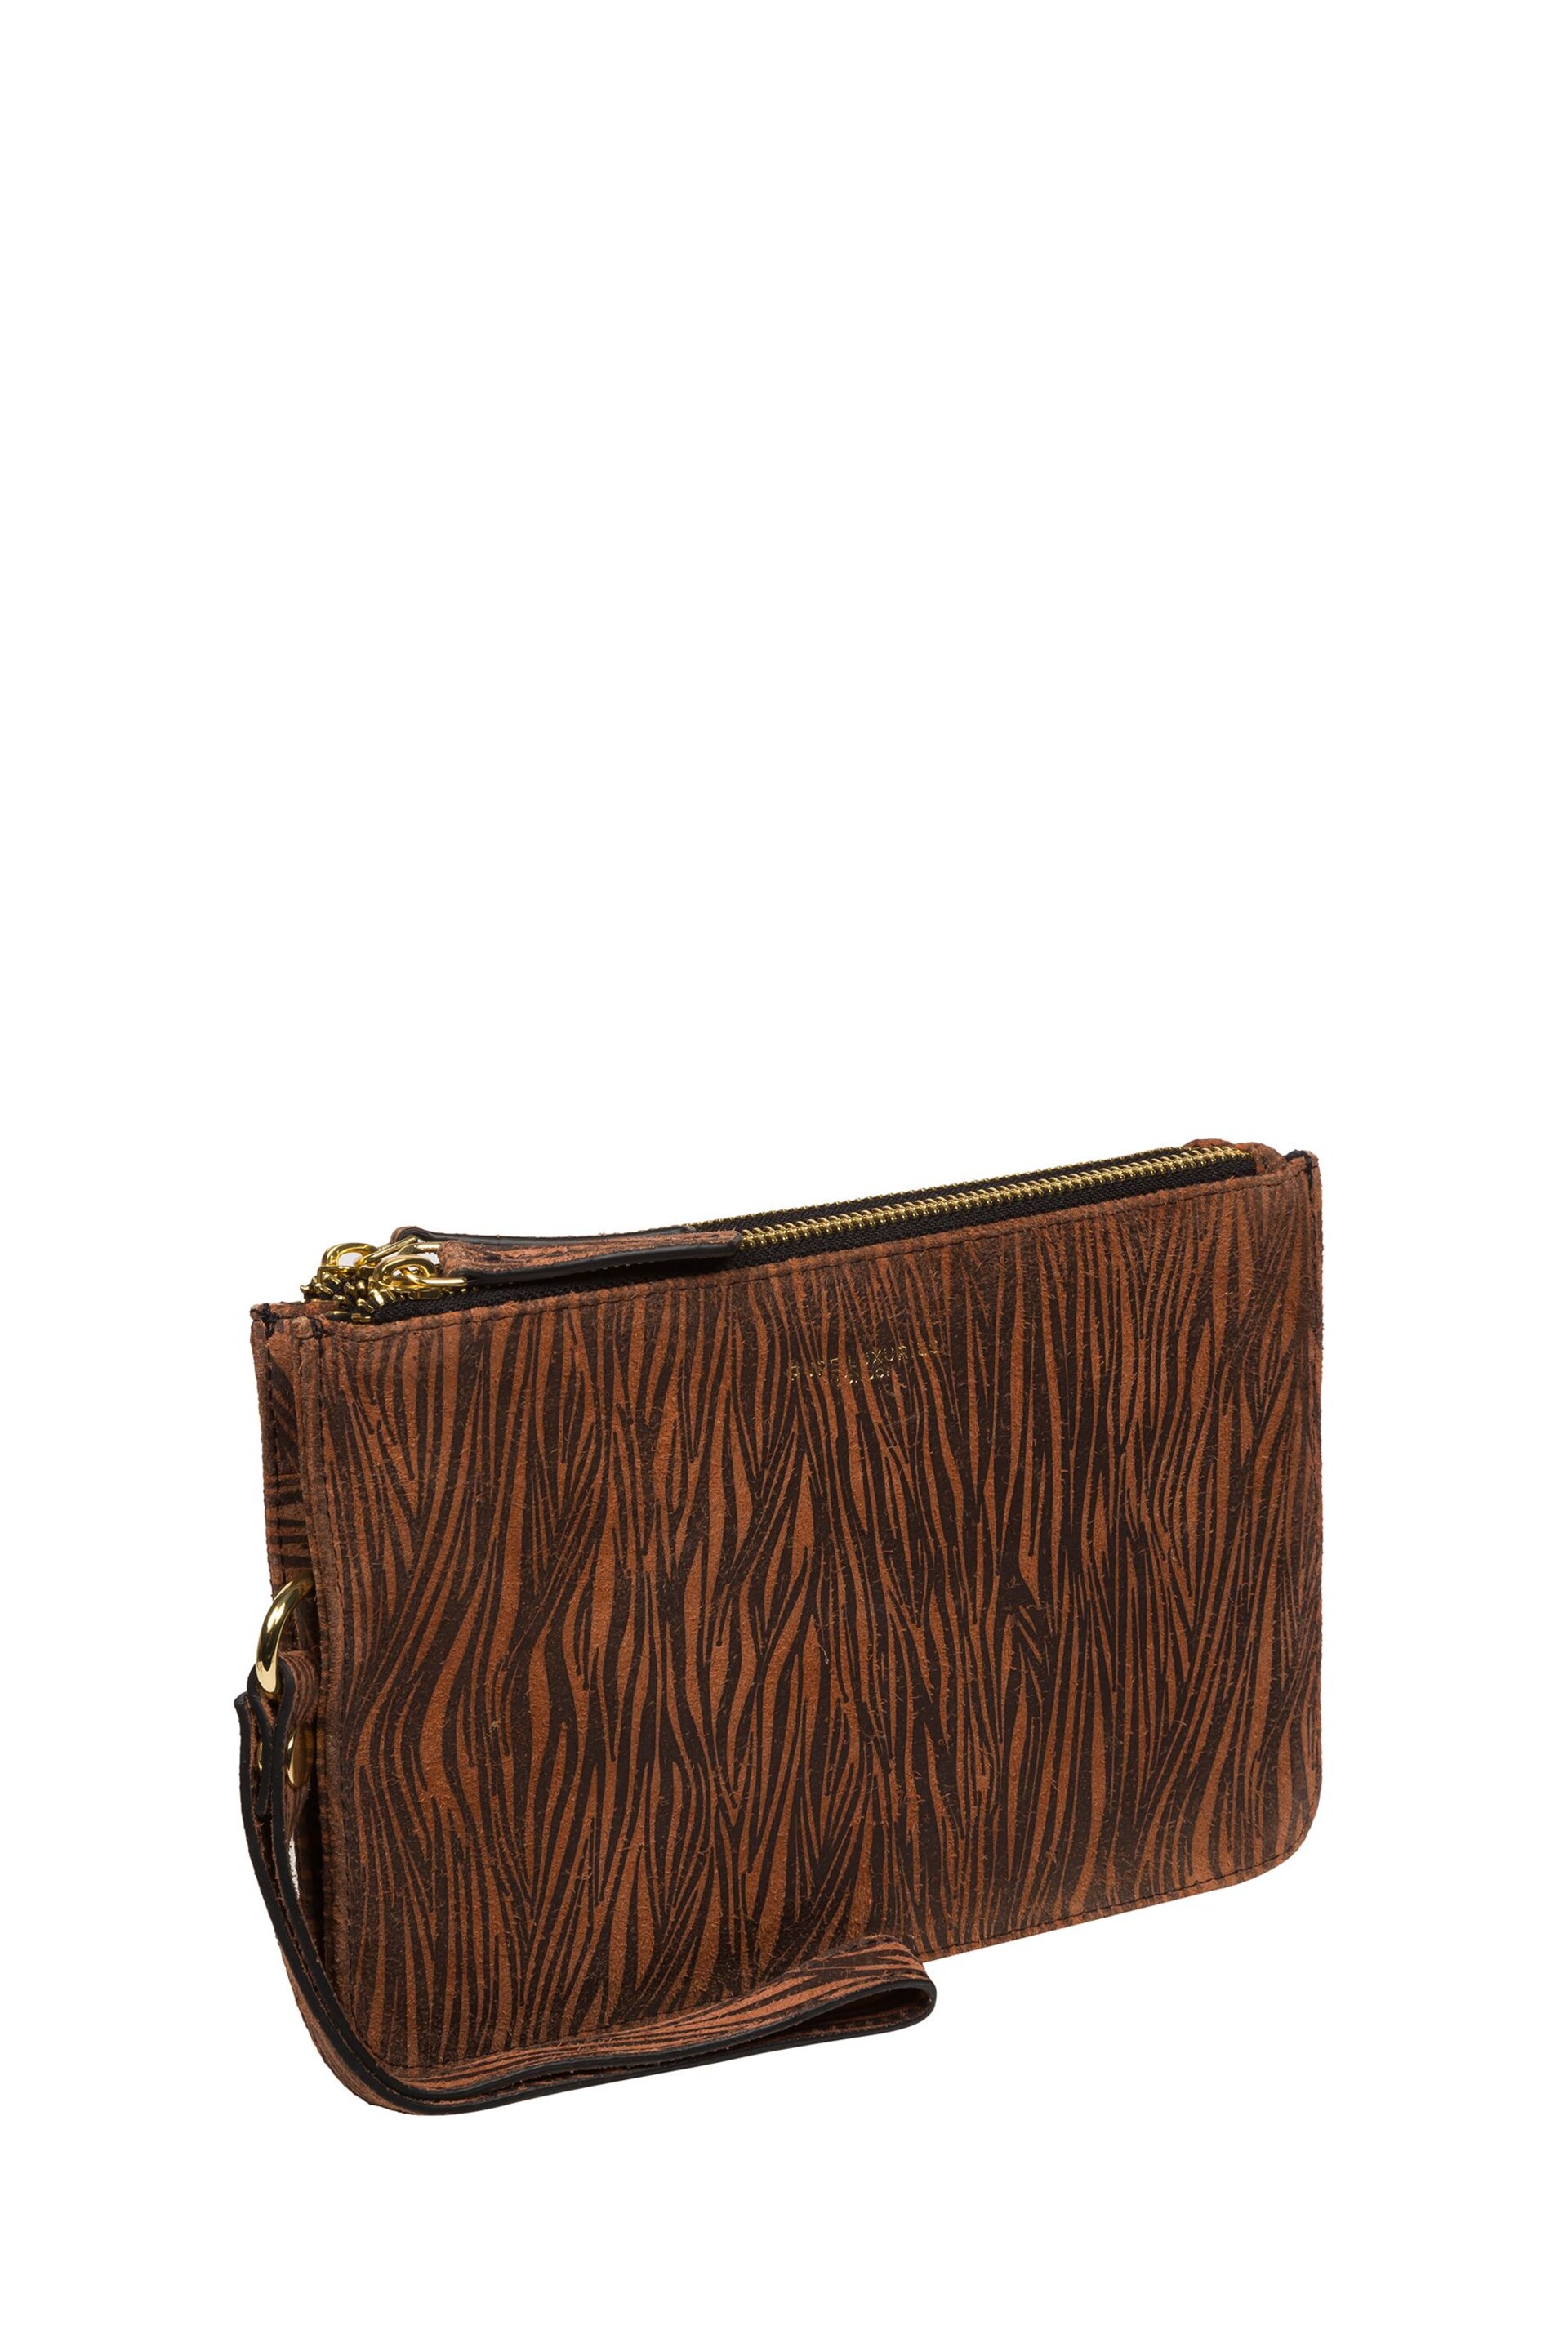 Pure Luxuries London Addison Nappa Leather Clutch Bag - Image 3 of 6